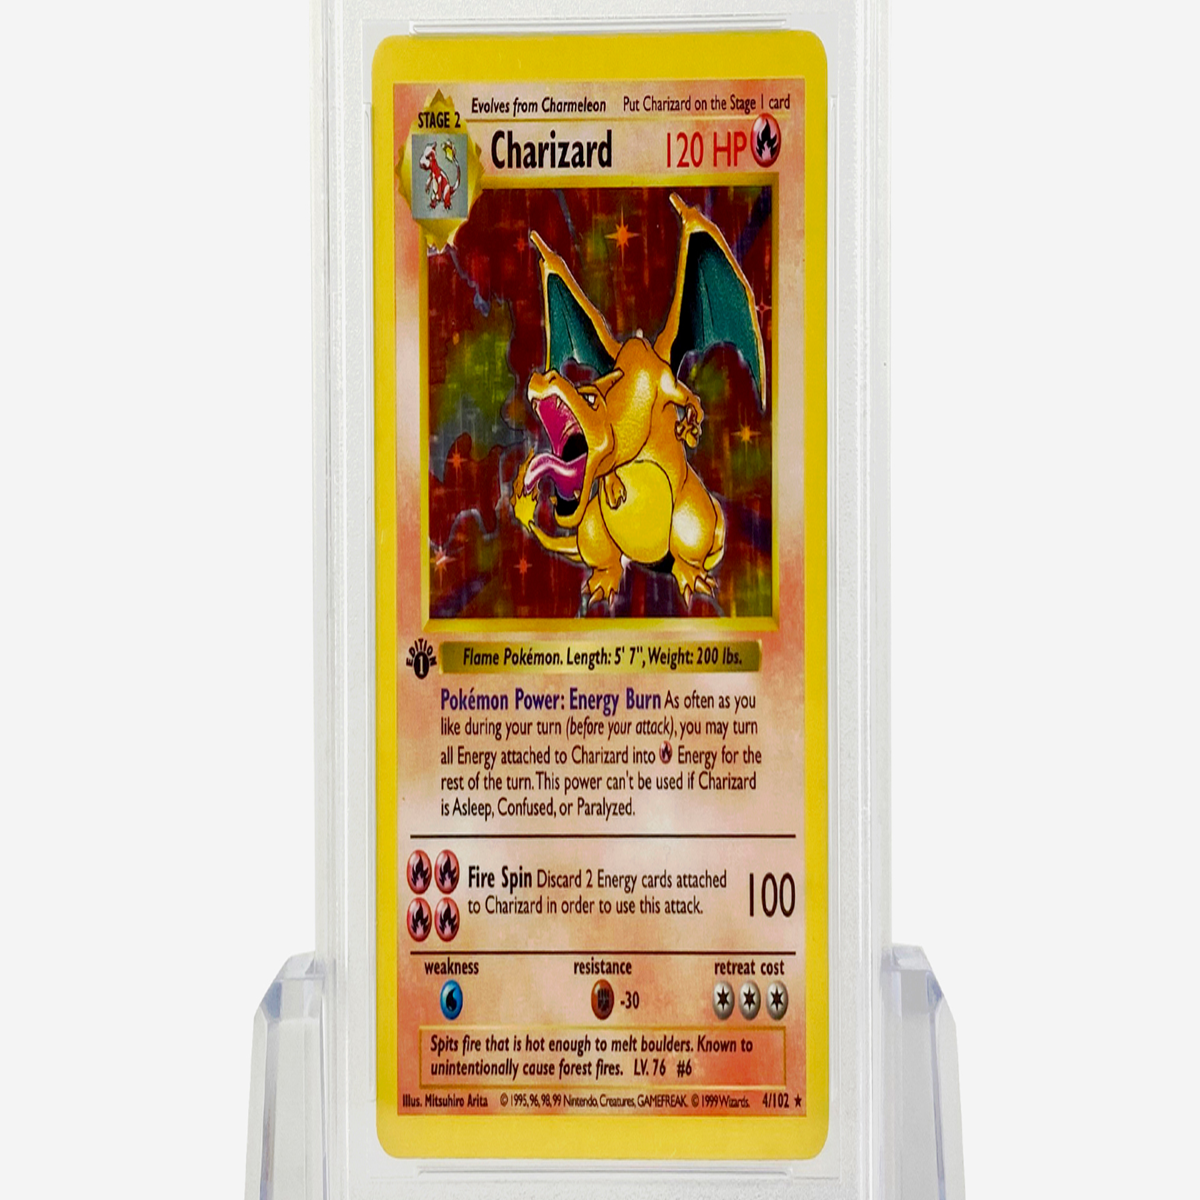 Rare Pokemon Card Sells For Record Breaking Amount